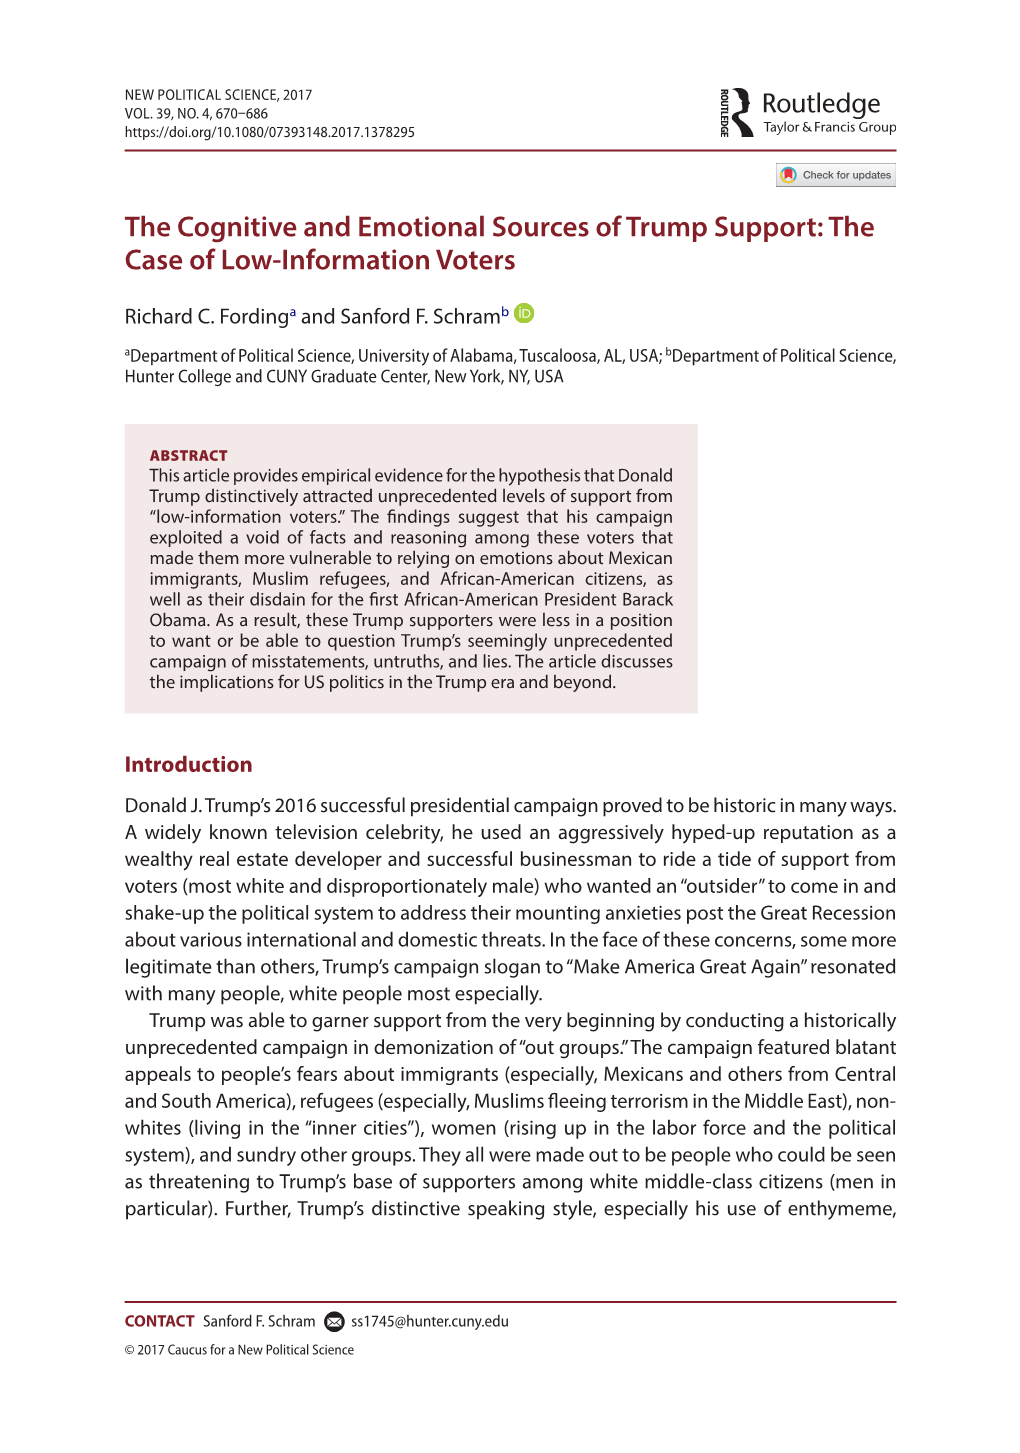 The Cognitive and Emotional Sources of Trump Support: the Case of Low-Information Voters